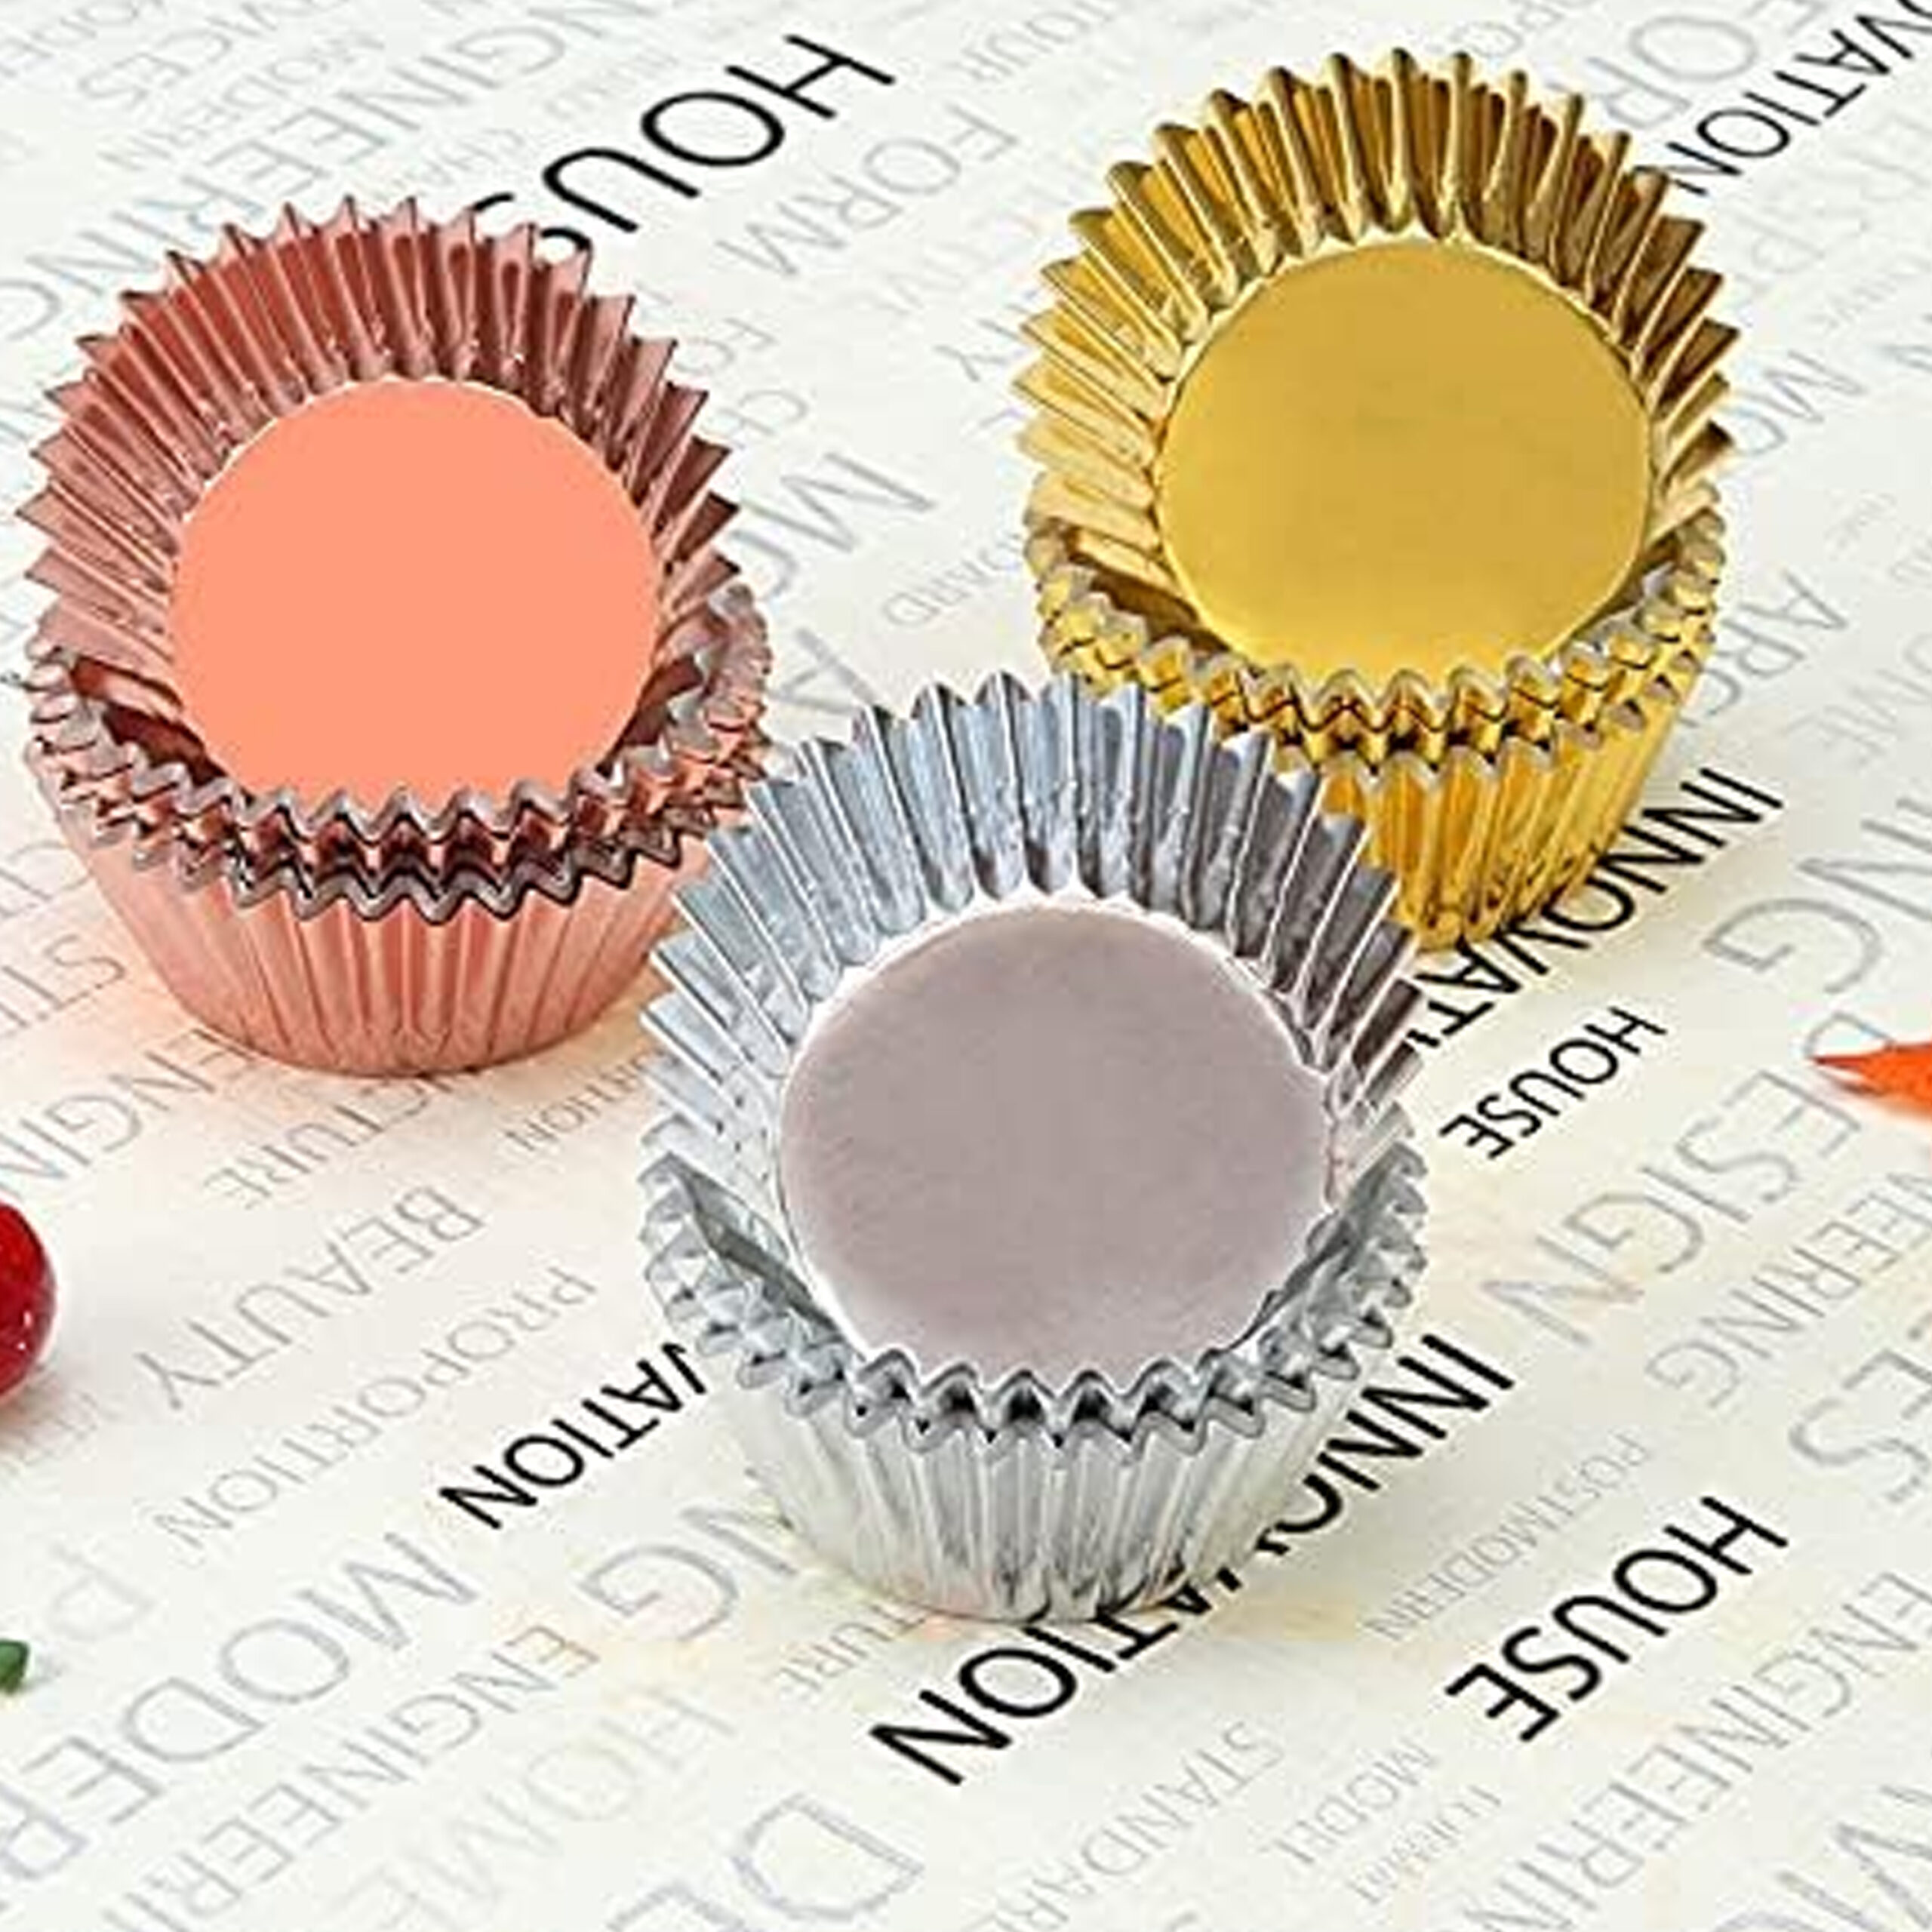 CAROUSEL FOIL
BAKING CUP S4
(1x60)